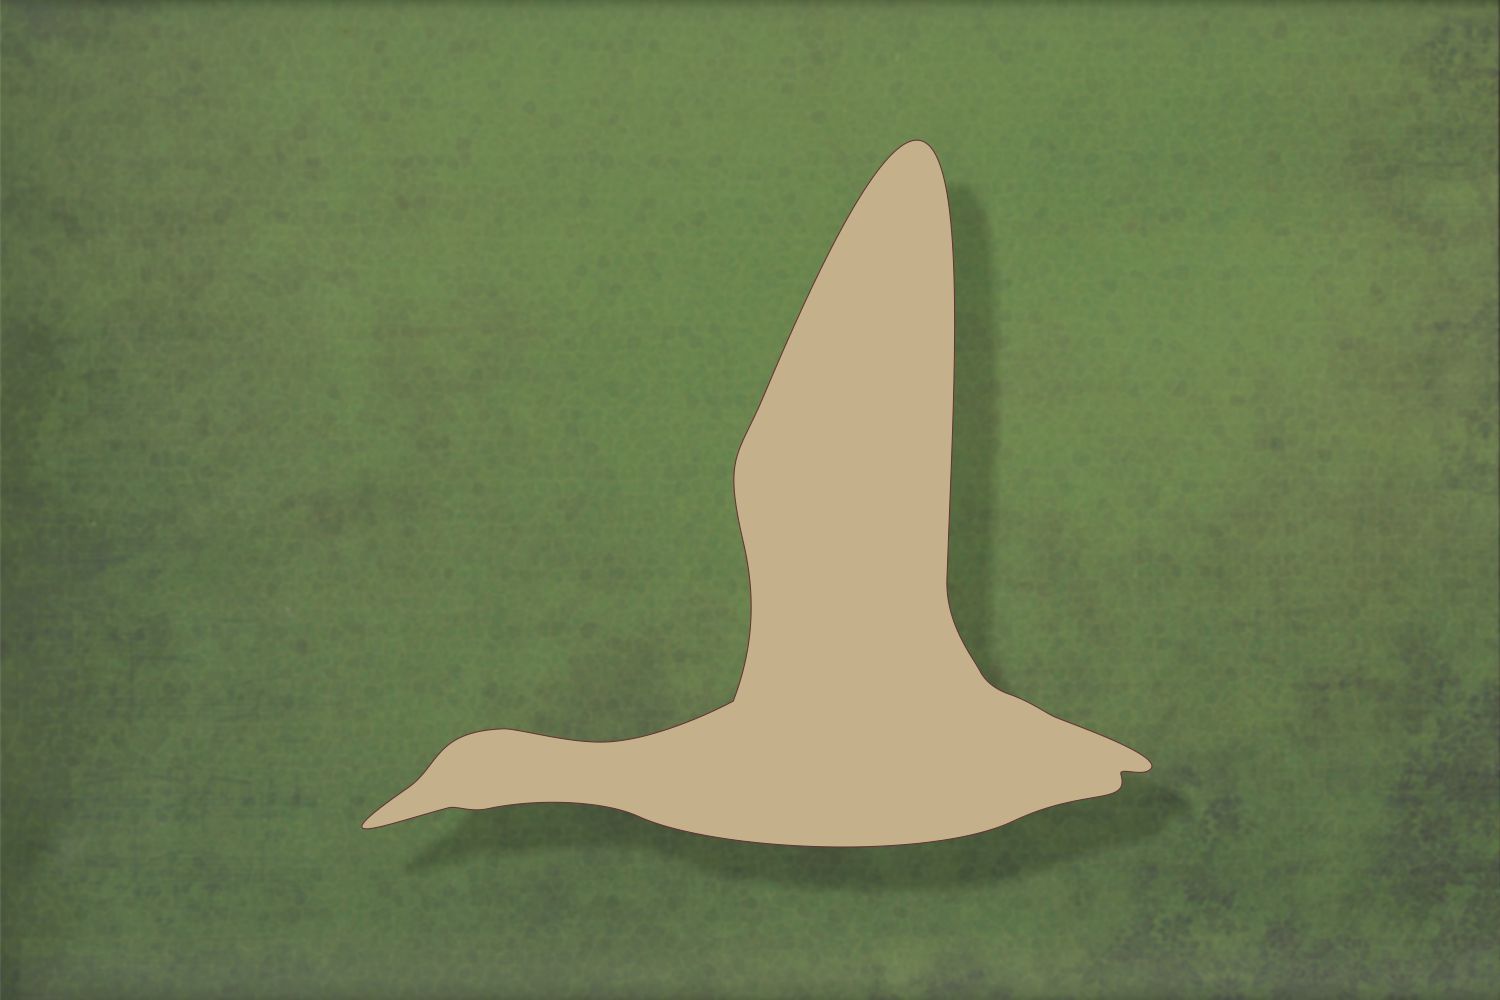 Laser cut, blank wooden Flying duck shape for craft